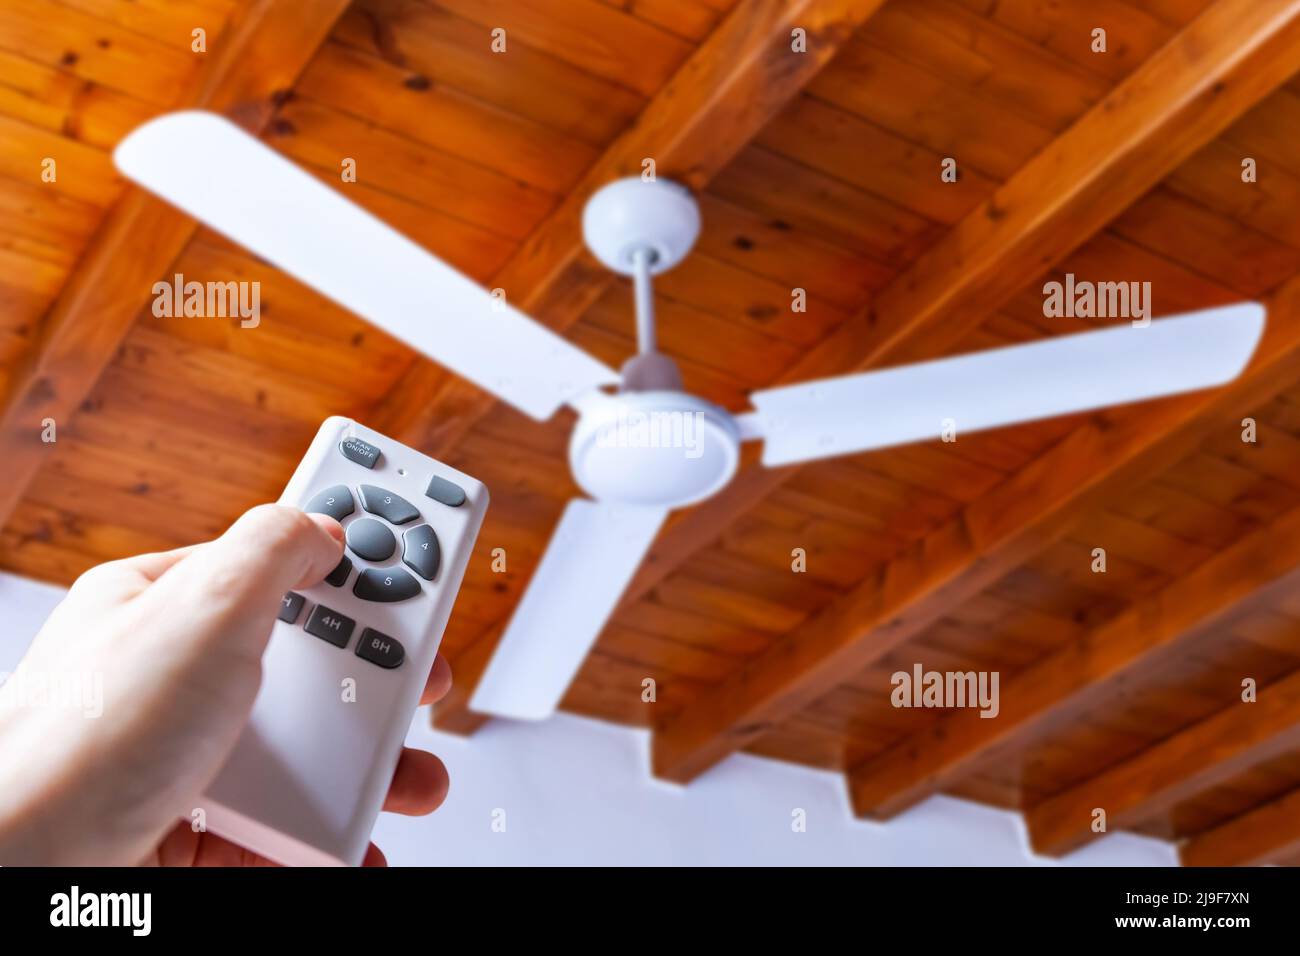 Close up shot of a hand using a remote control to operate a ceiling fan mounted in a house on a wooden ceiling. Stock Photo